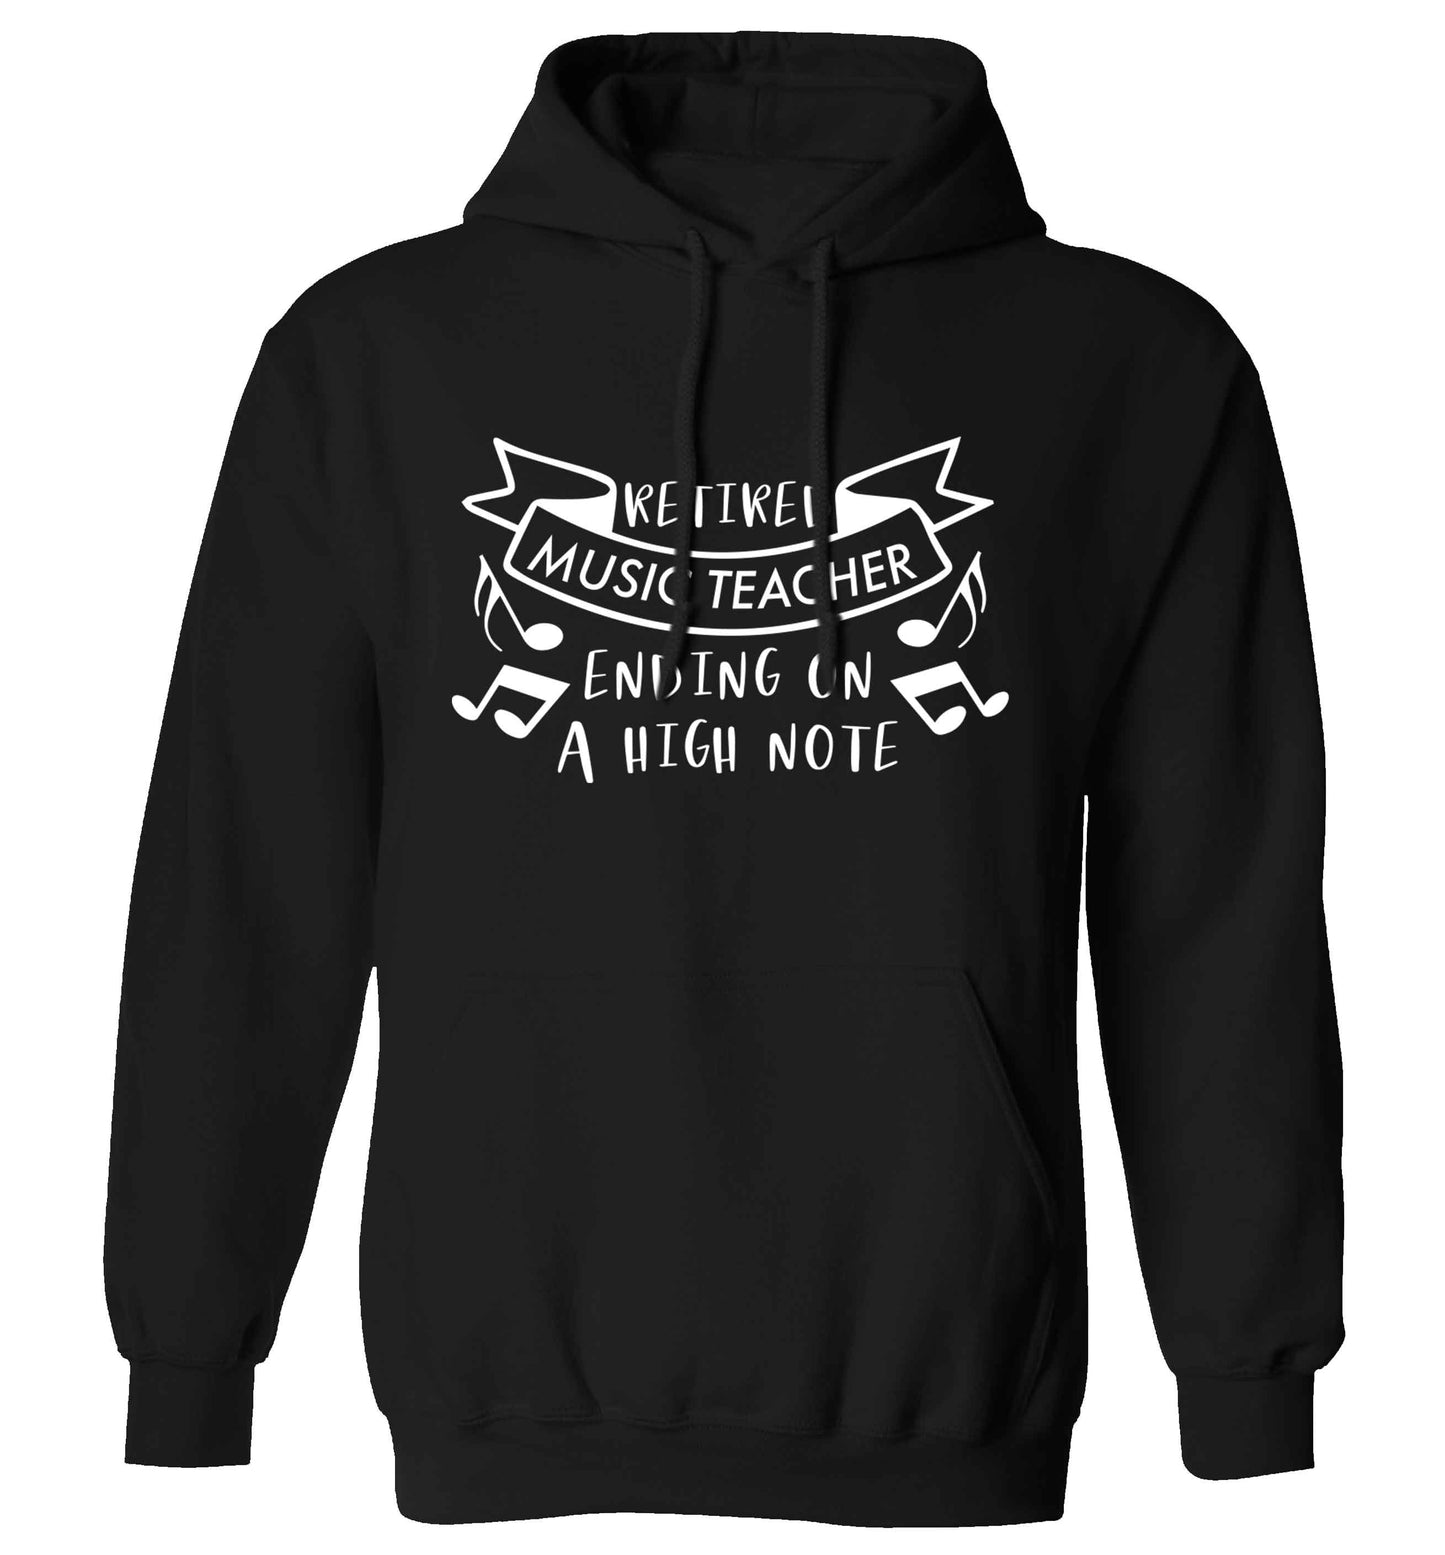 Retired music teacher ending on a high note adults unisex black hoodie 2XL